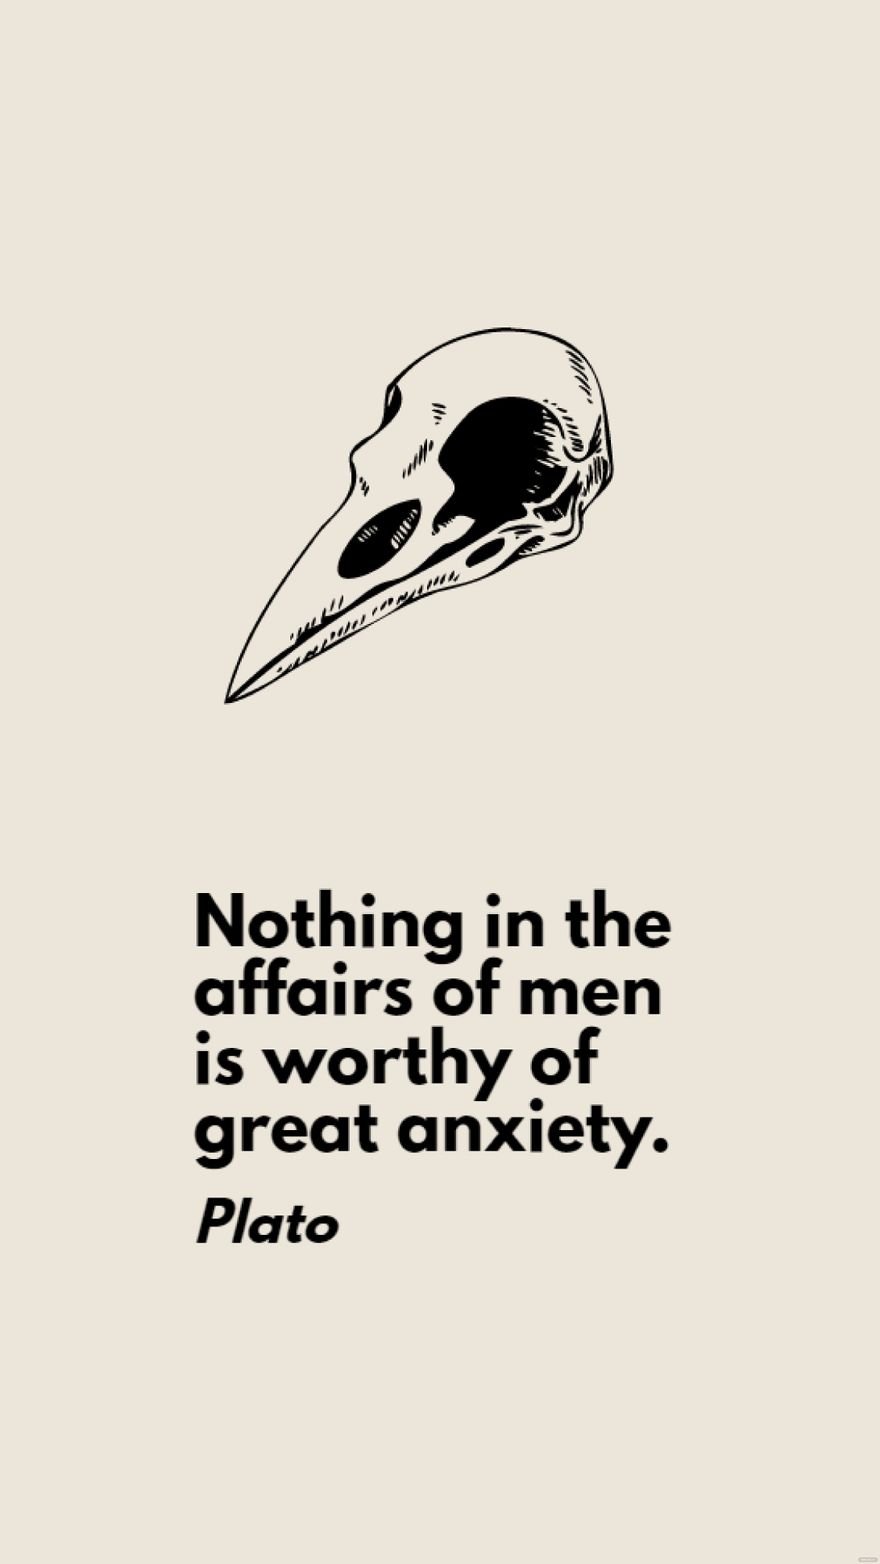 Free Plato - Nothing in the affairs of men is worthy of great anxiety. in JPG